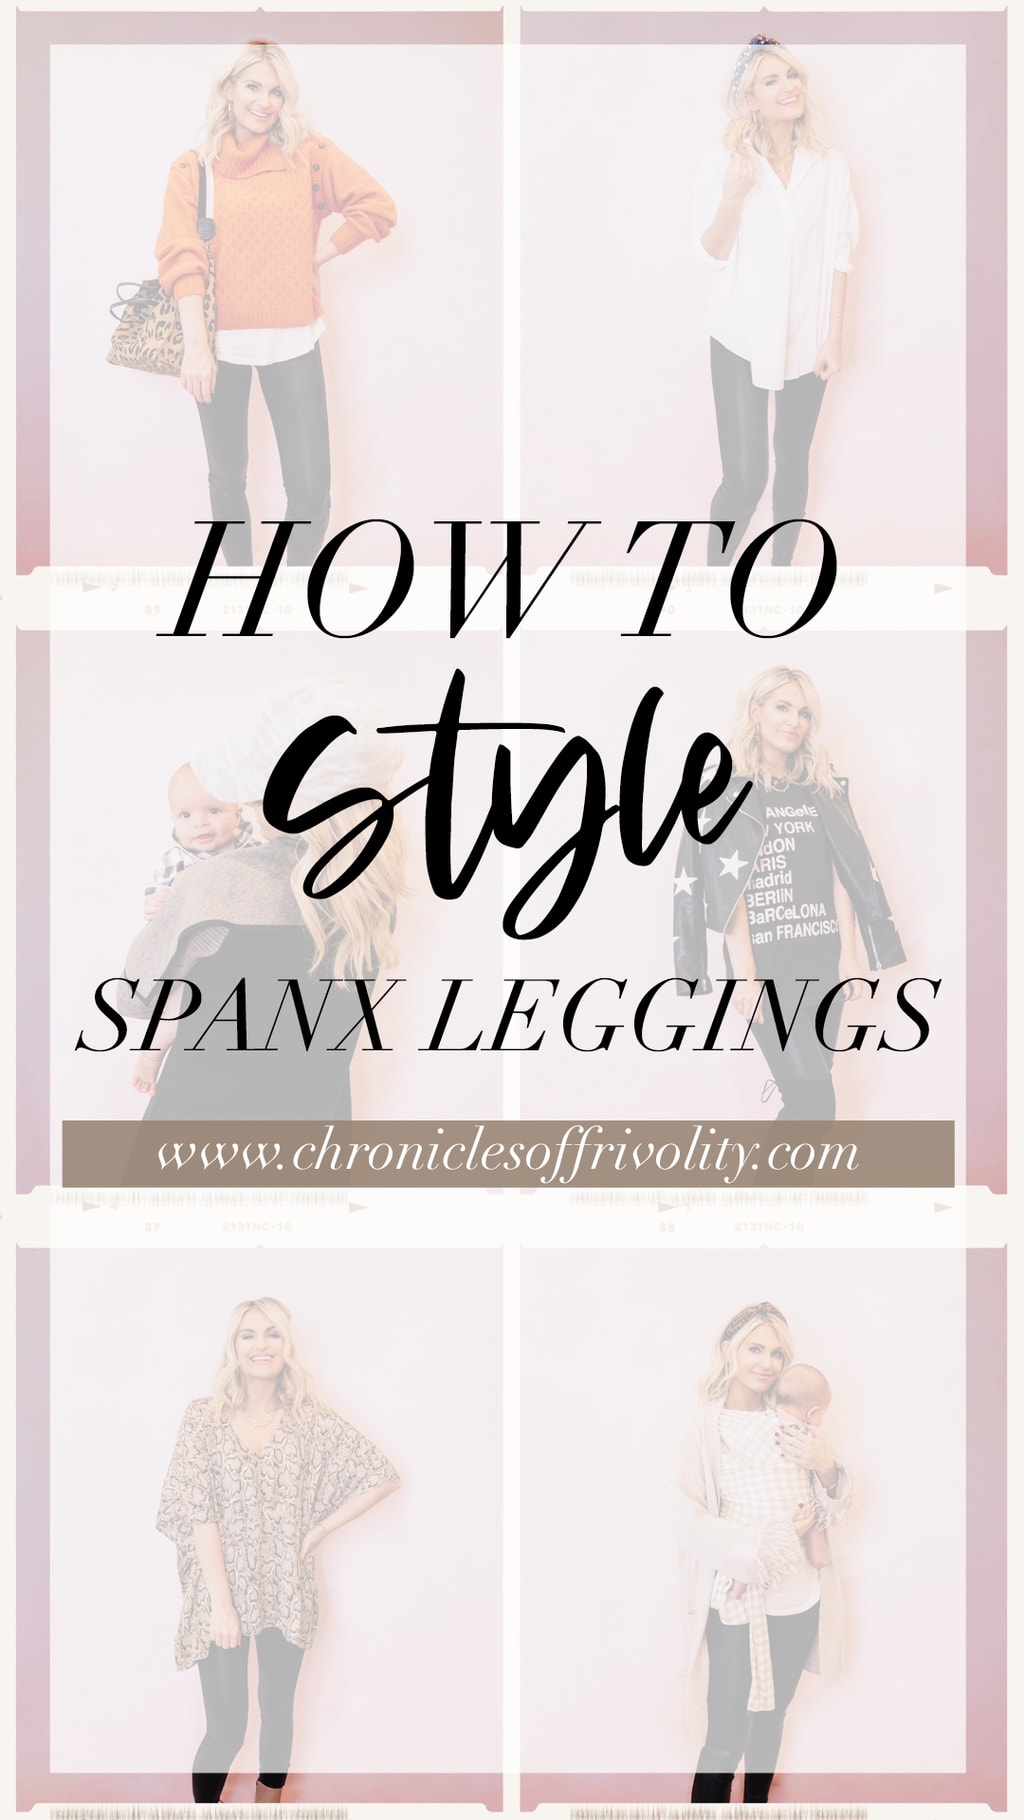 Soutiens da SPANX » online na ABOUT YOU